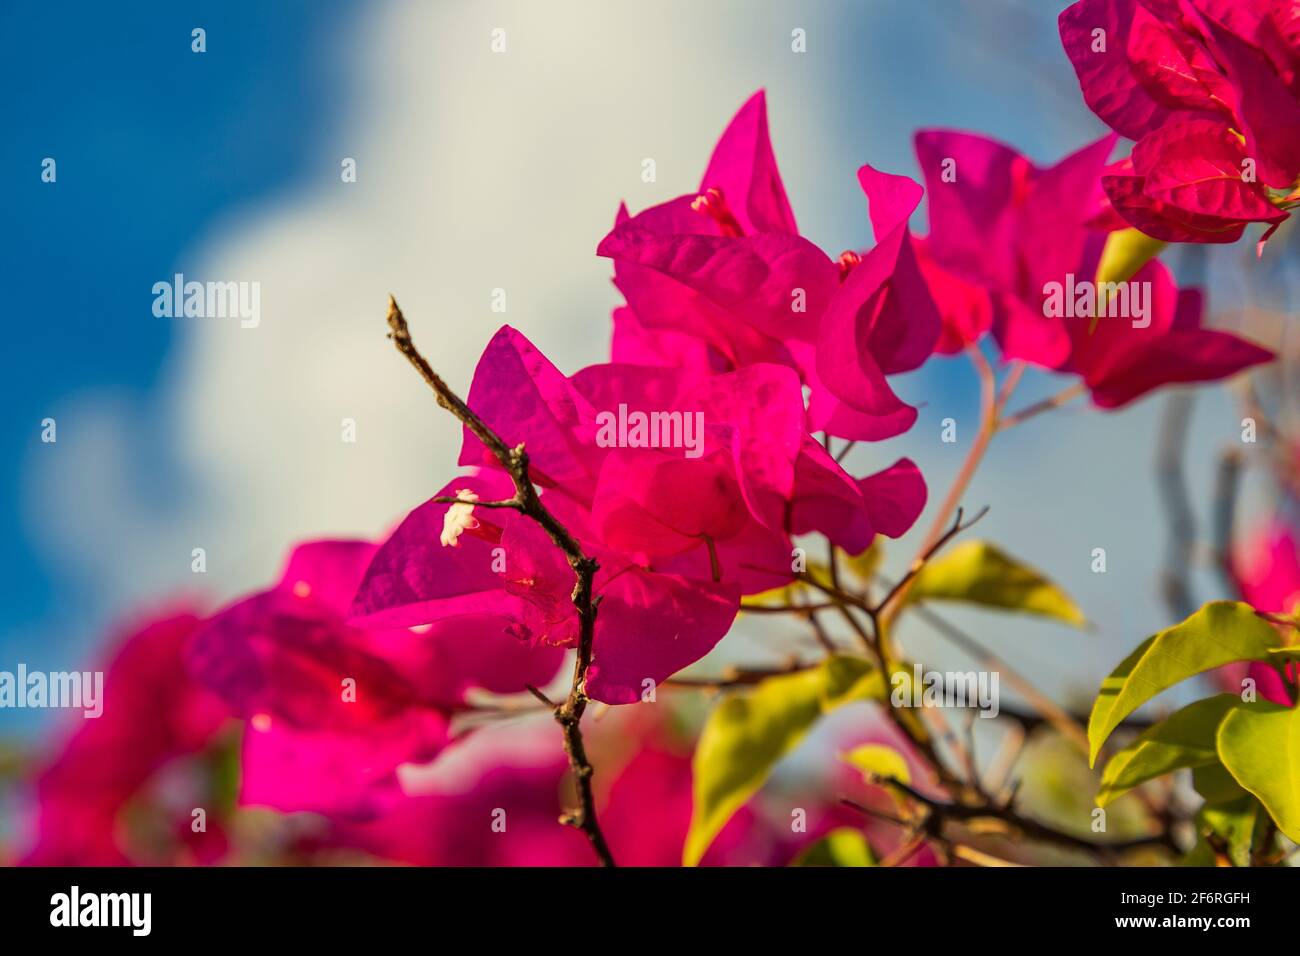 pink bougainvillea flowers arrangeed diagonally in frame Stock Photo